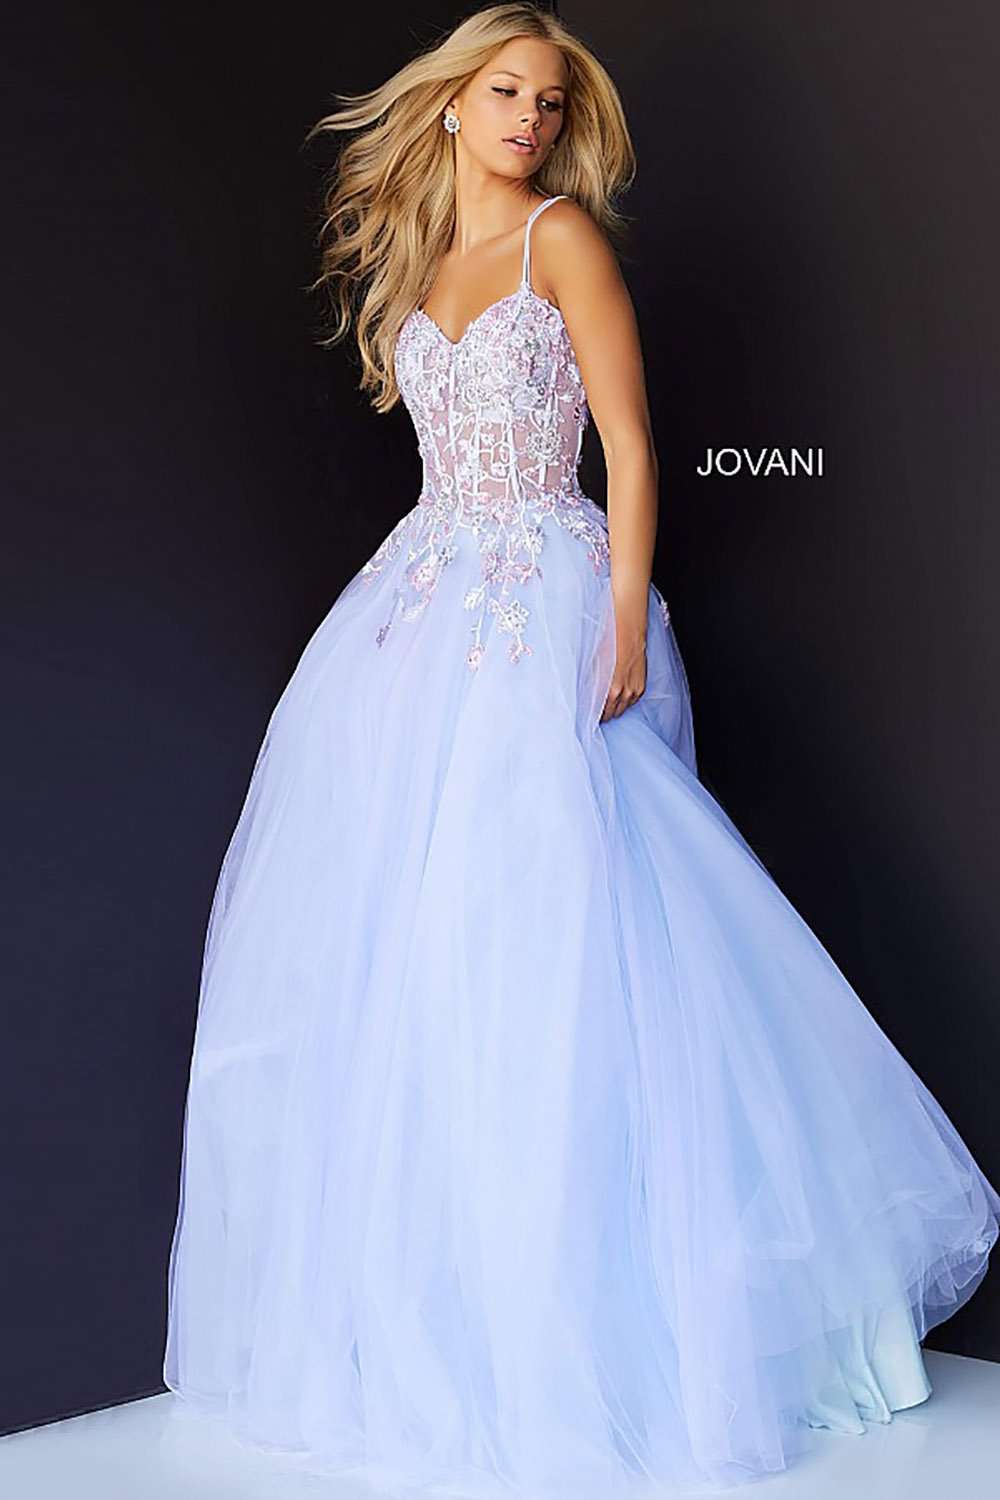 Lilac Floral Bodice Gorgeous Prom Ballgown Jovani 06207 - Morvarieds Fashion